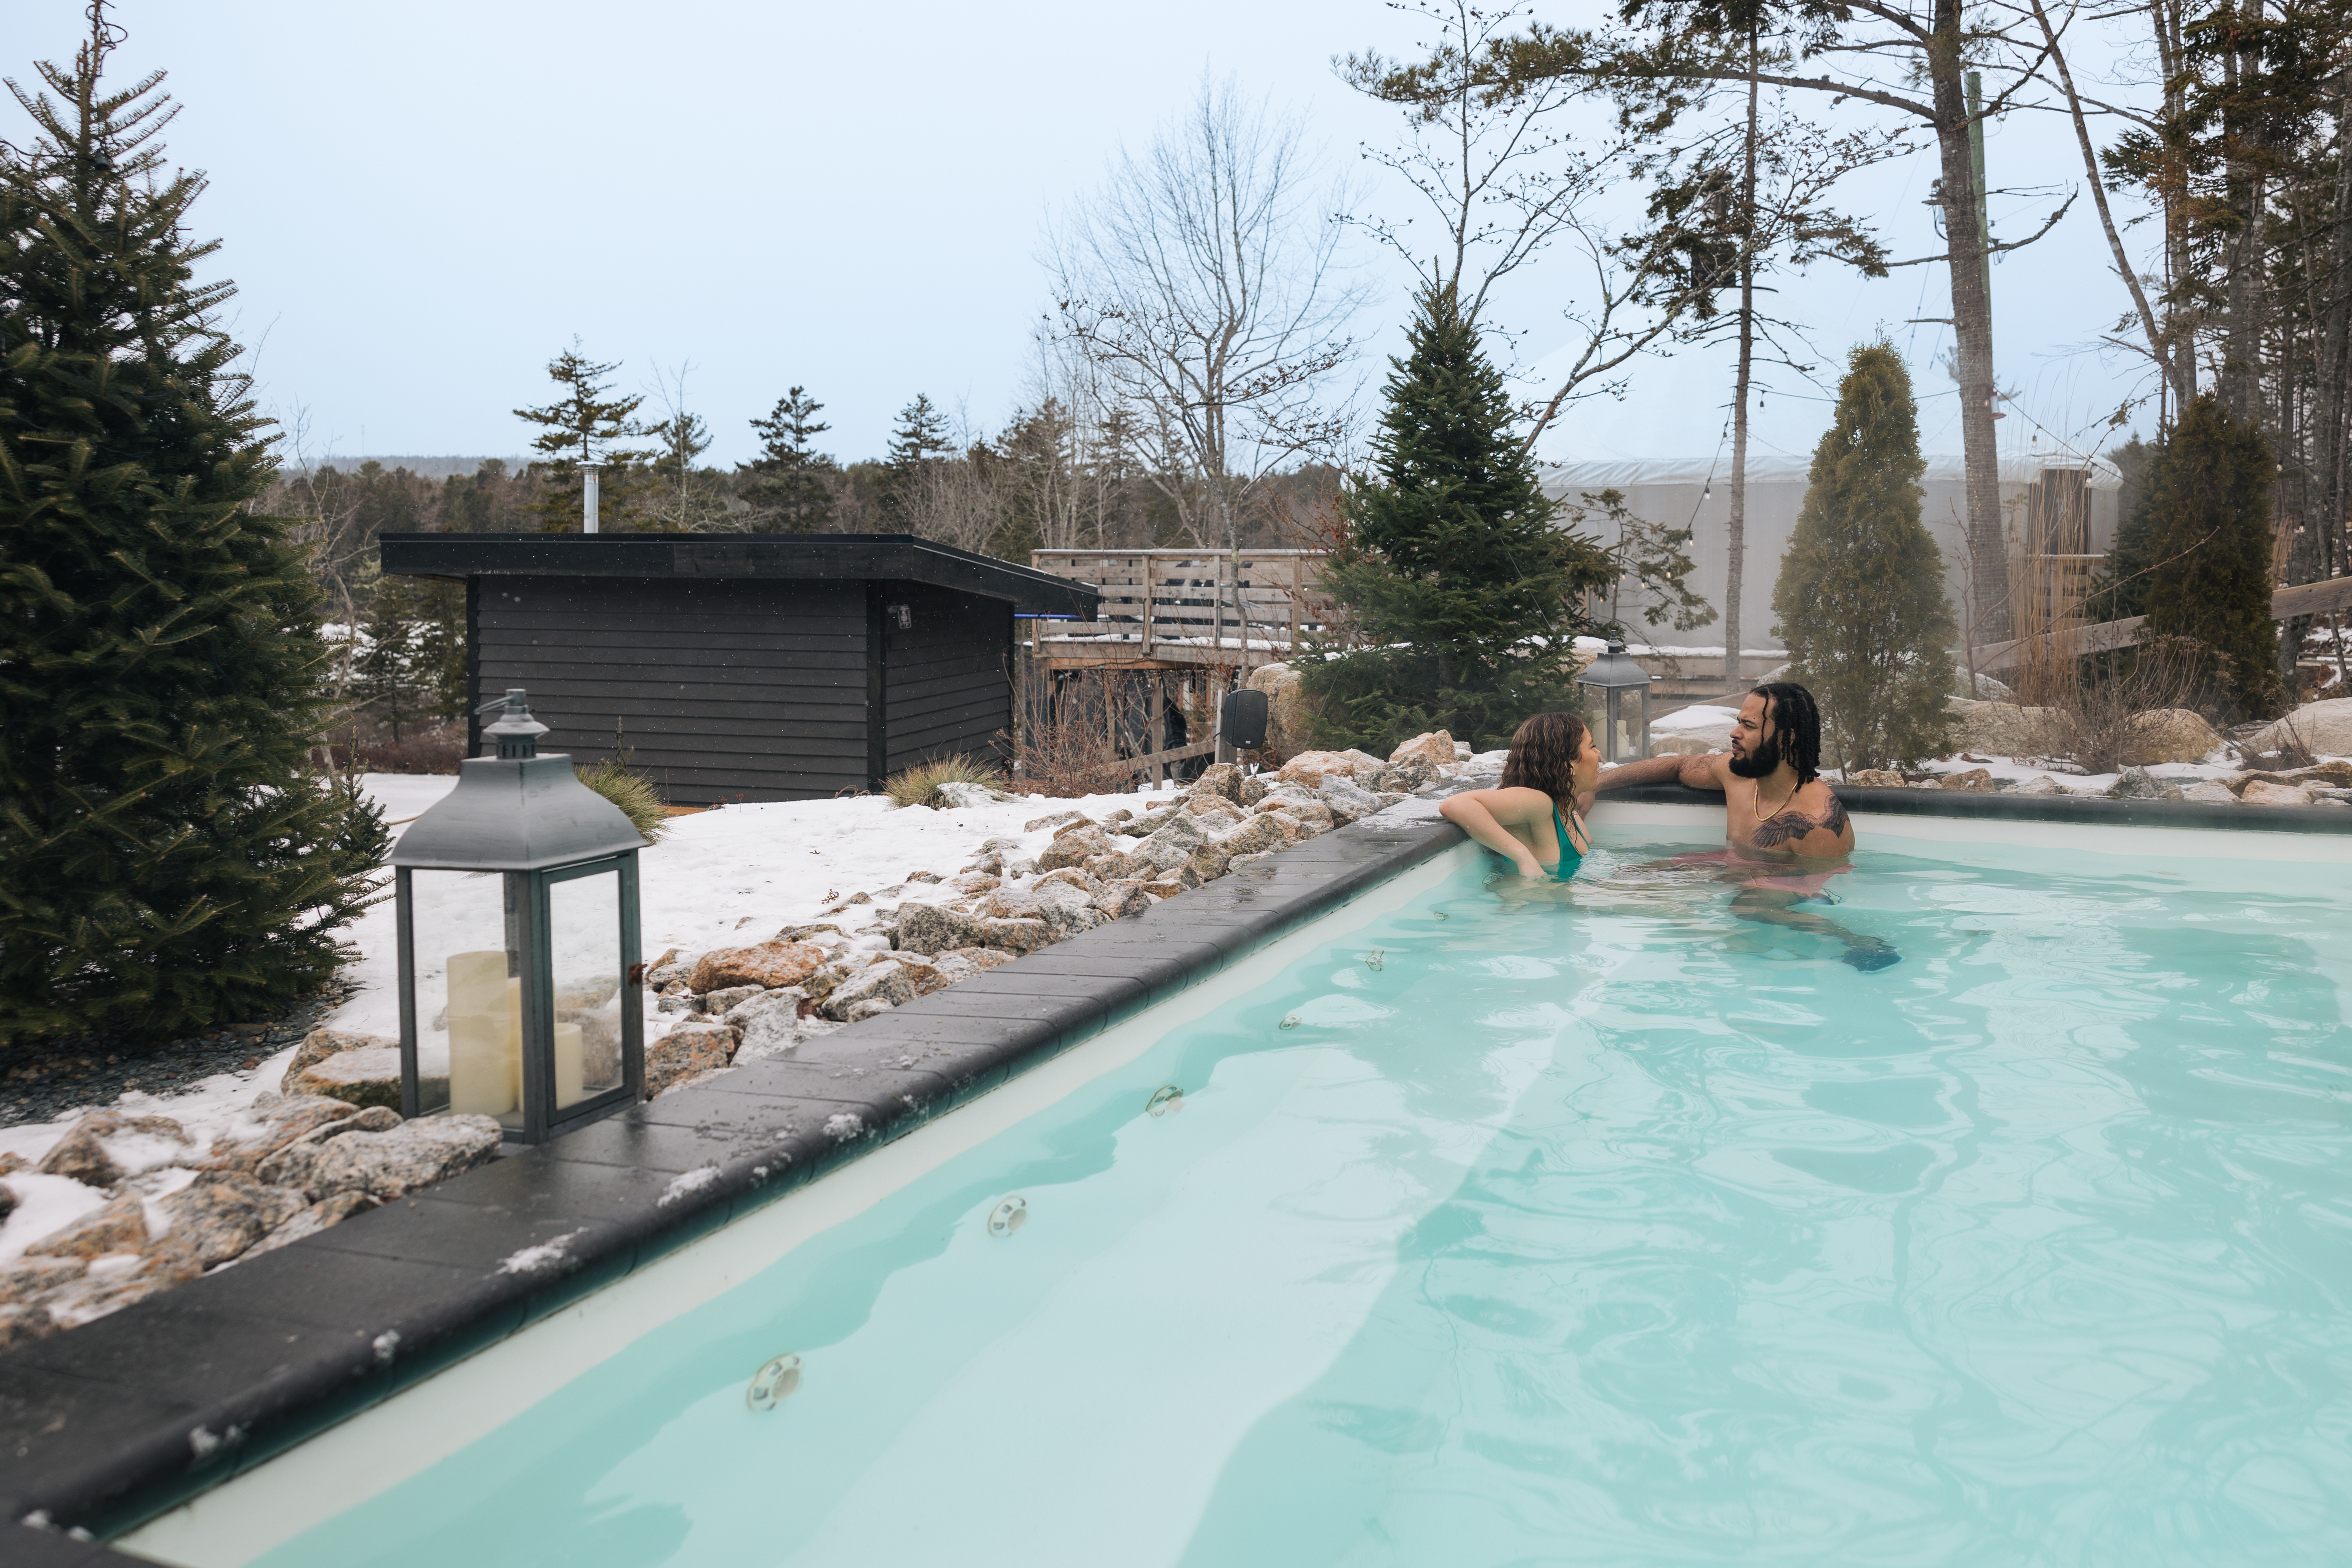 Couple lounging in the corner of a pool in winter with a small black building in the background.